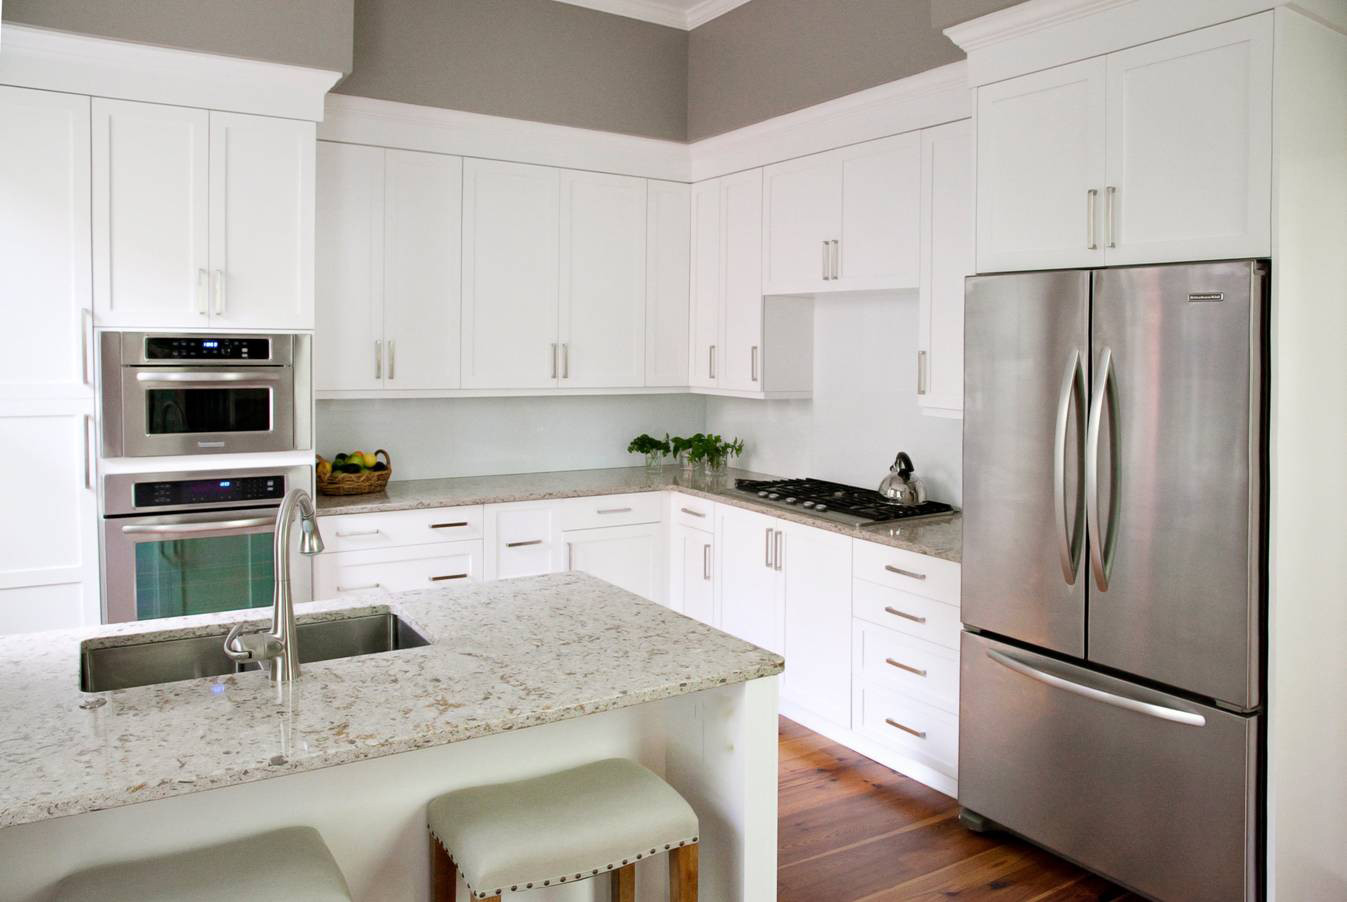 Kitchen Cabinets Color Ideas
 Most Popular Kitchen Cabinet Colors in 2019